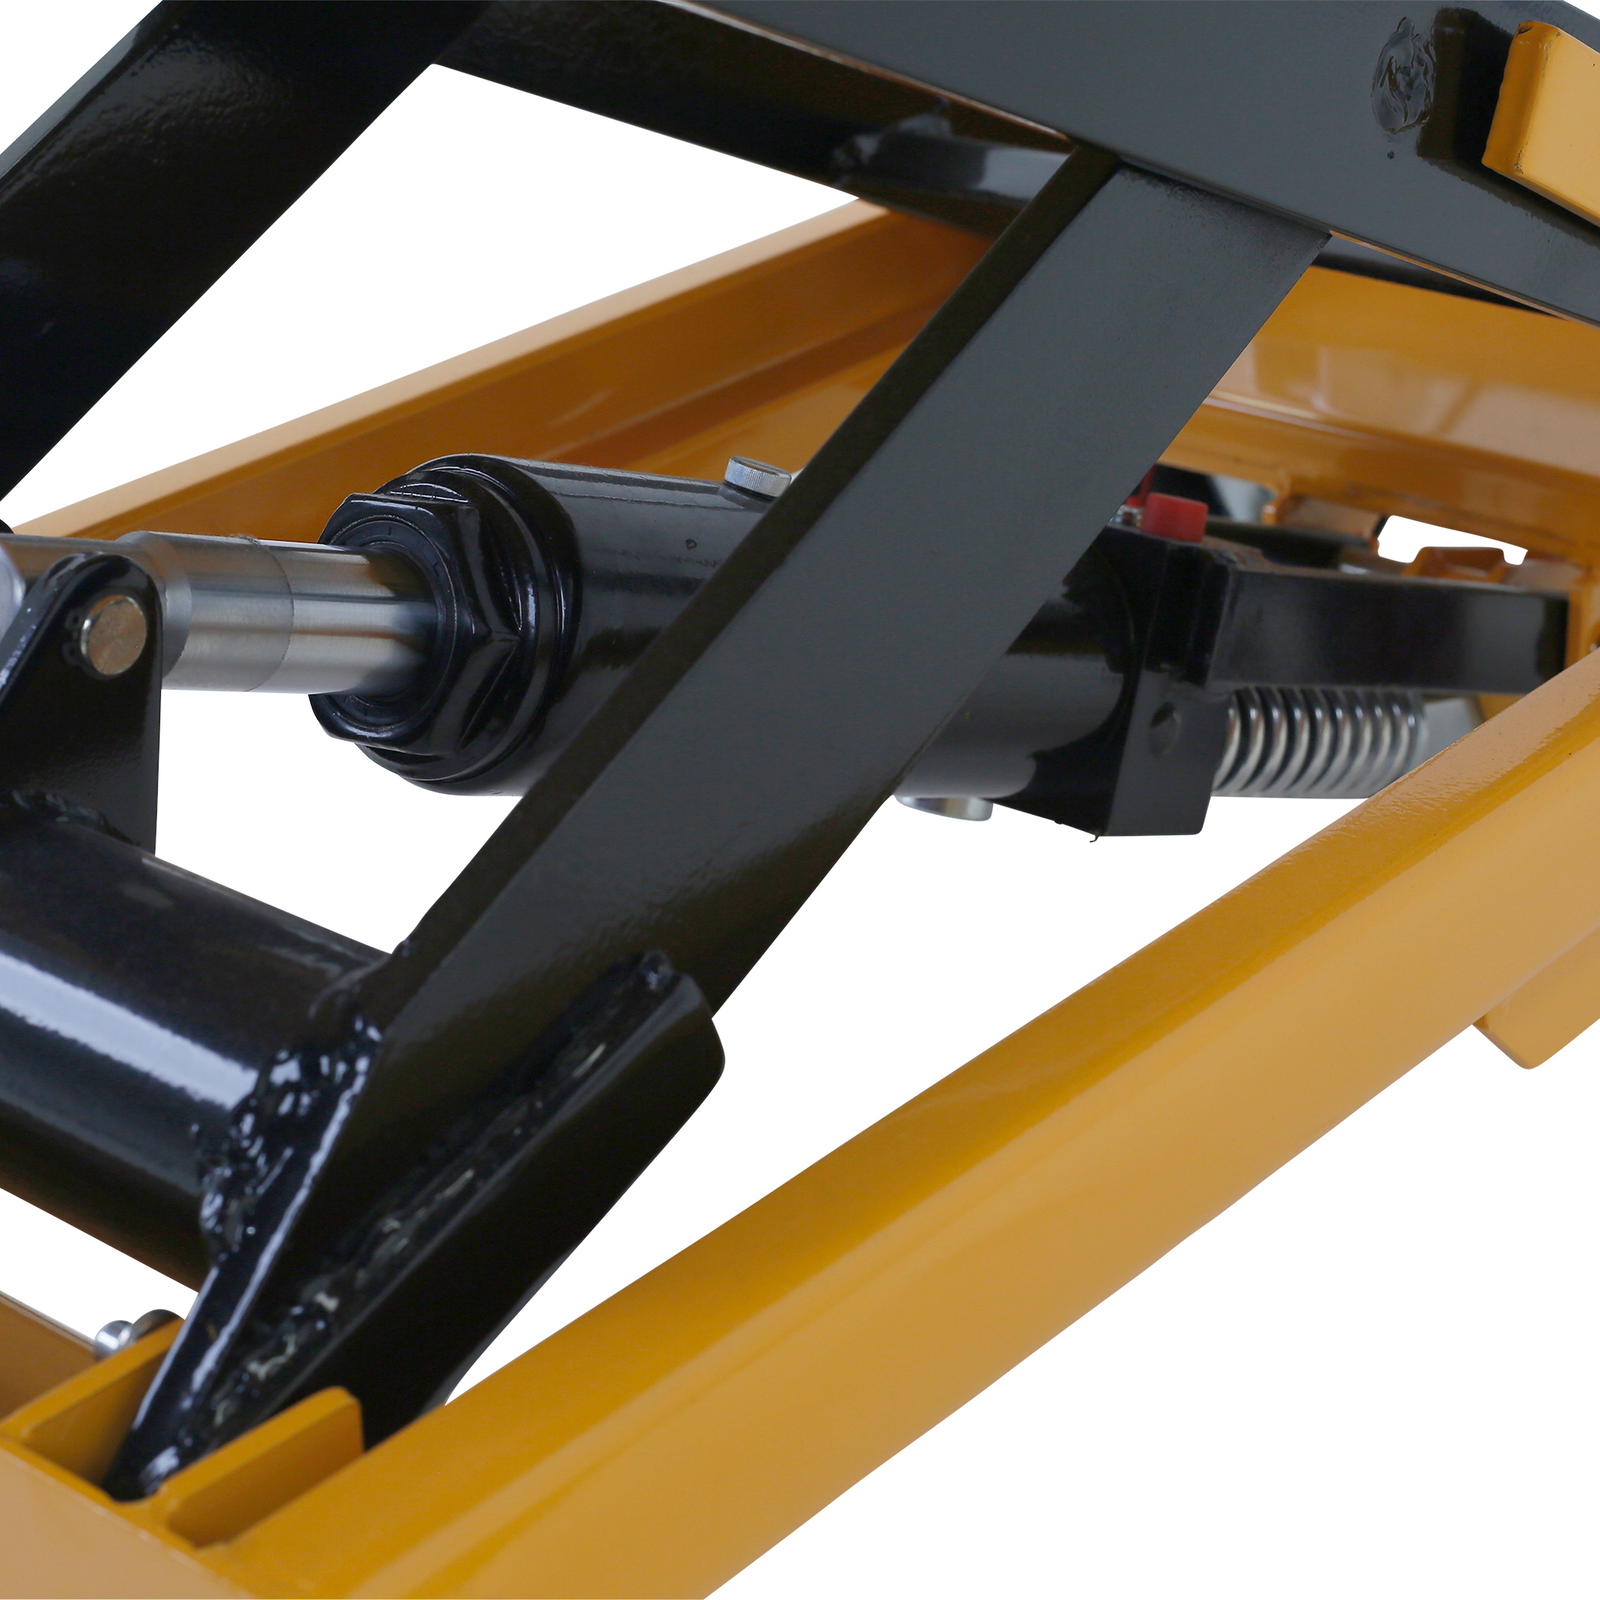 Hydraulic mechanism of the mobile scissor lift table for 330 pounds